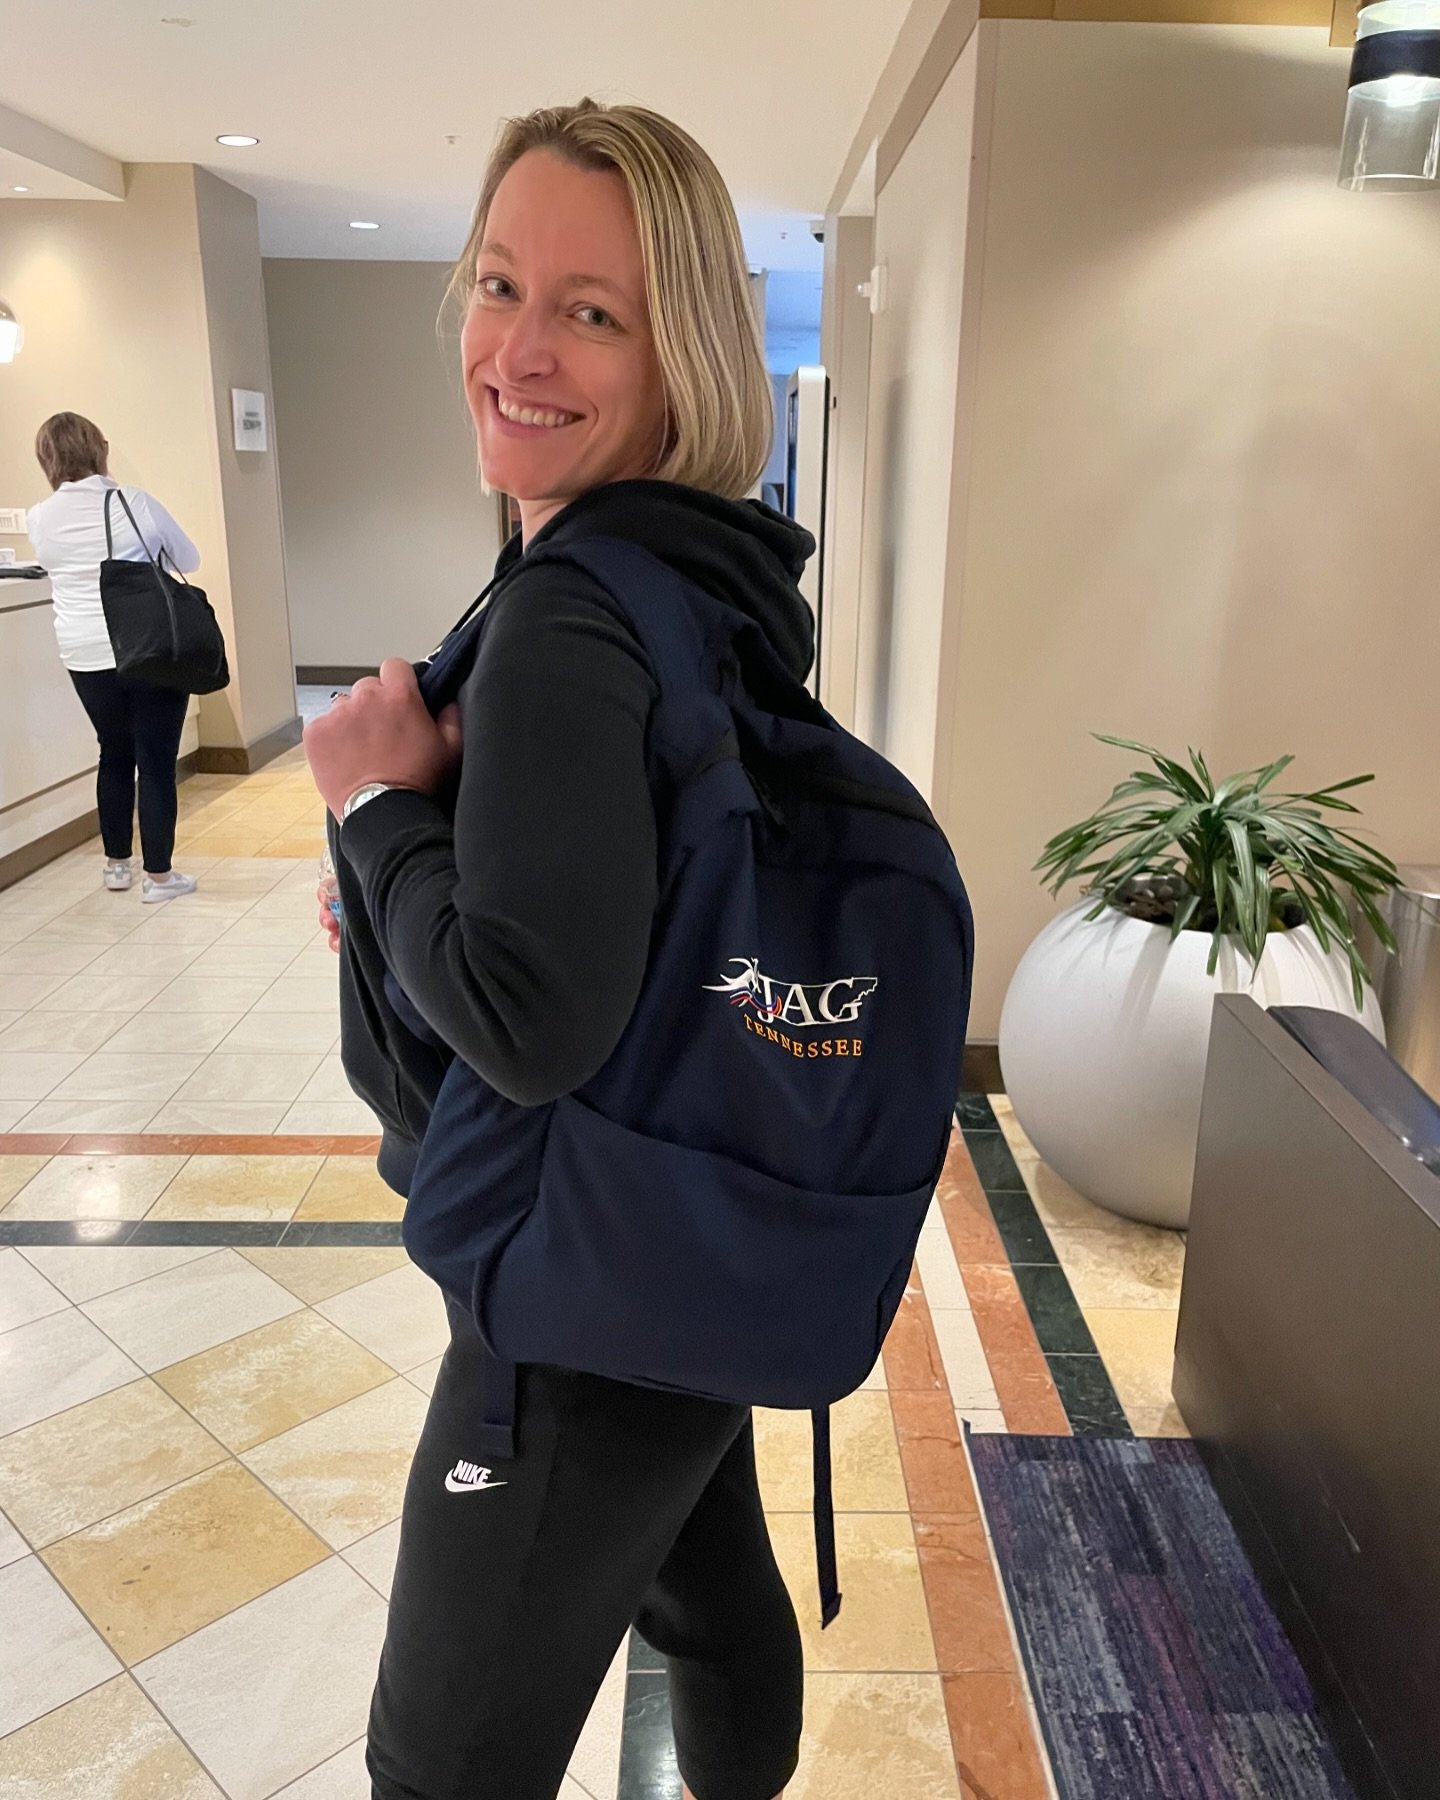 JAG President &amp; CEO traveling from Washington DC to St. Louis in style for JAG&rsquo;s National Career Development Conference later this week.&nbsp;&nbsp;Rockin&rsquo; the JAG Tennessee backpack!

@jag.national 
@durayjan